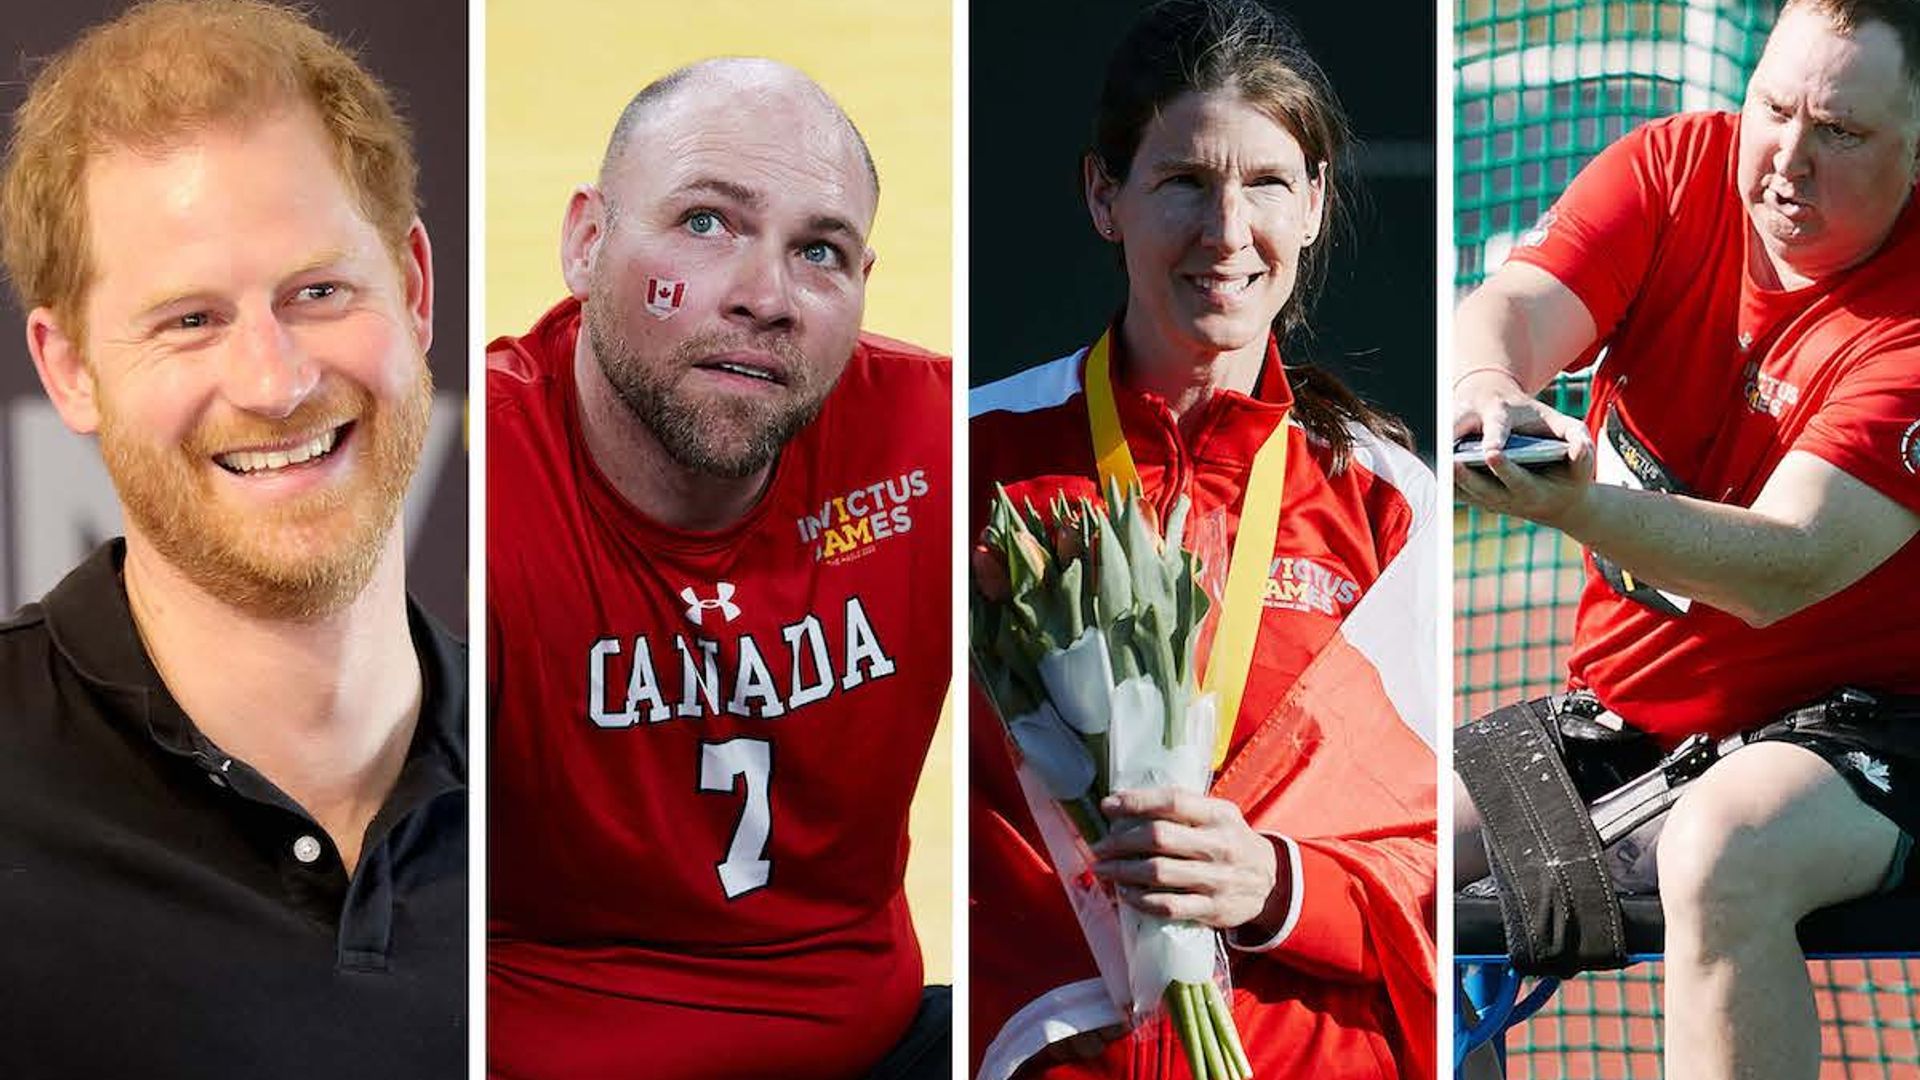 Prince Harry and Canadian Invictus Games athletes Chris Zizek, Jo Bradley and Mike Burt